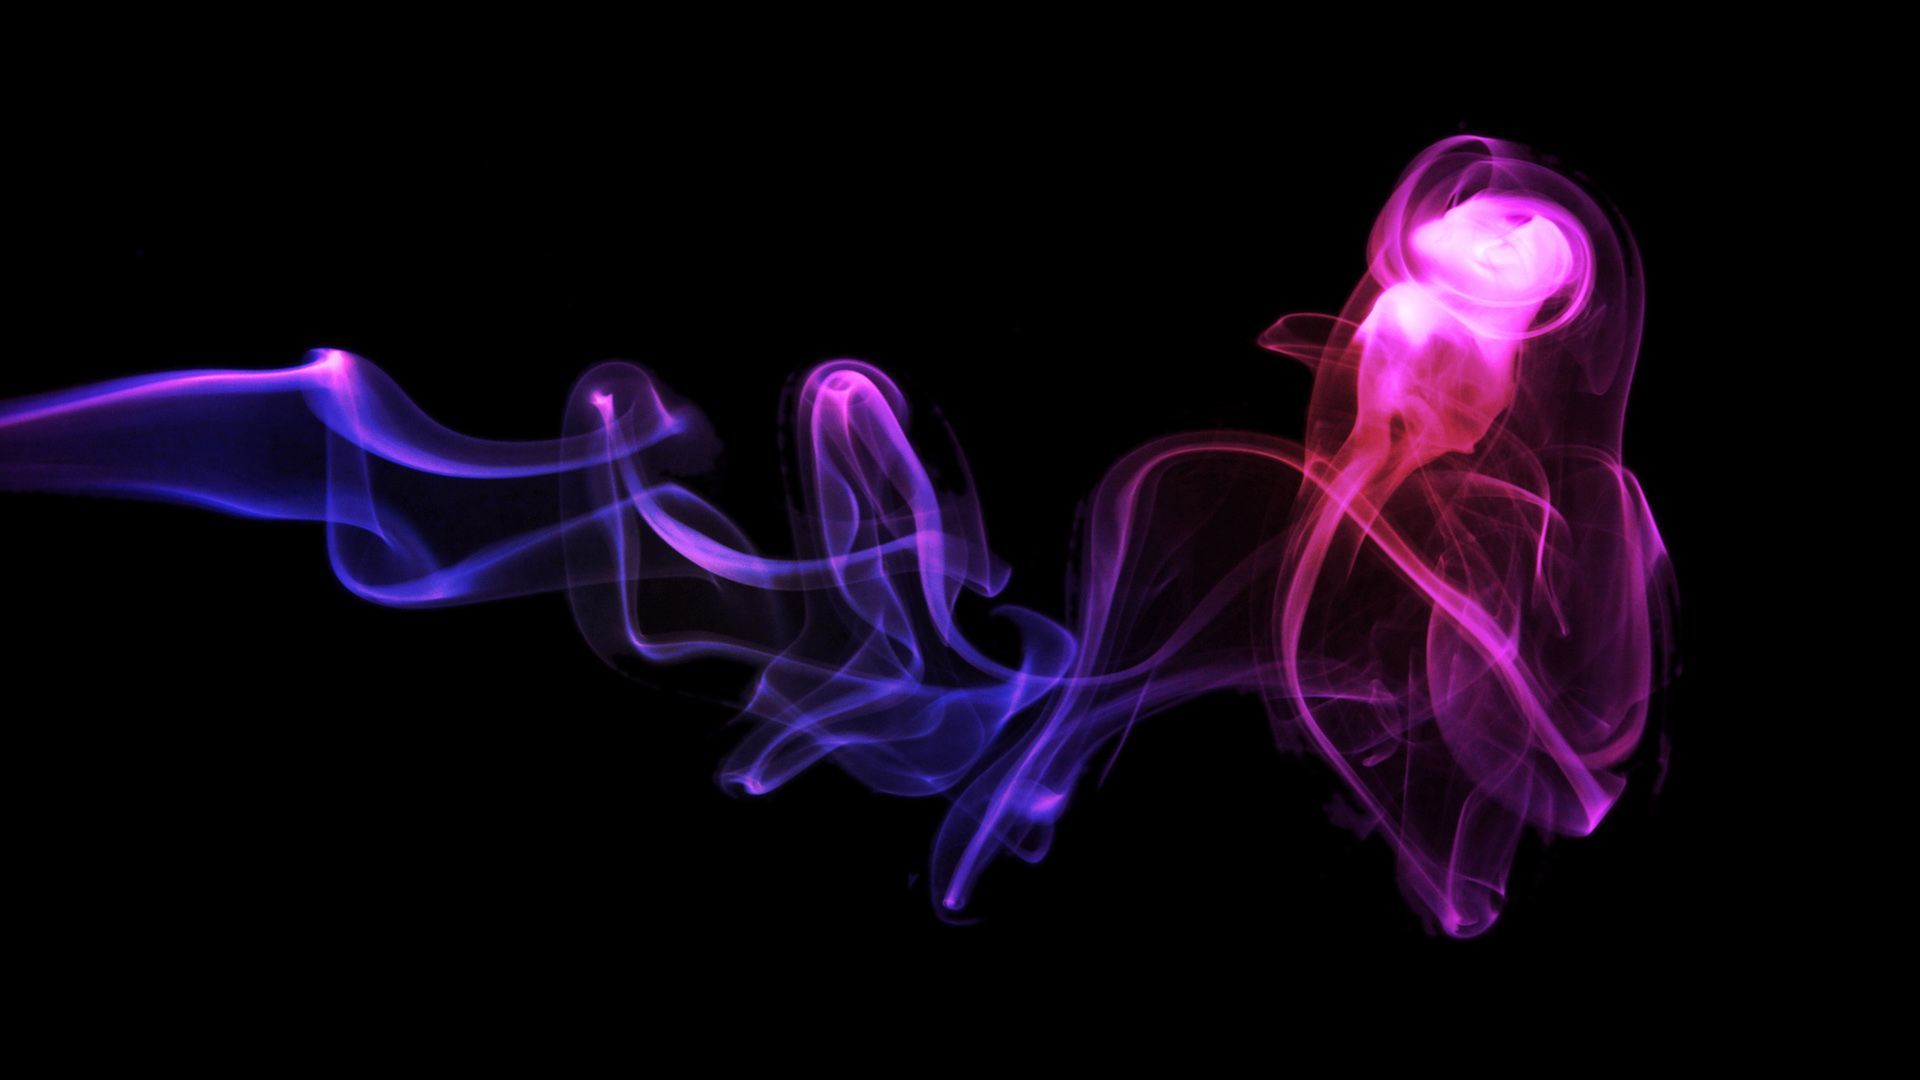 Abstract Smoke Wallpapers HD Backgrounds